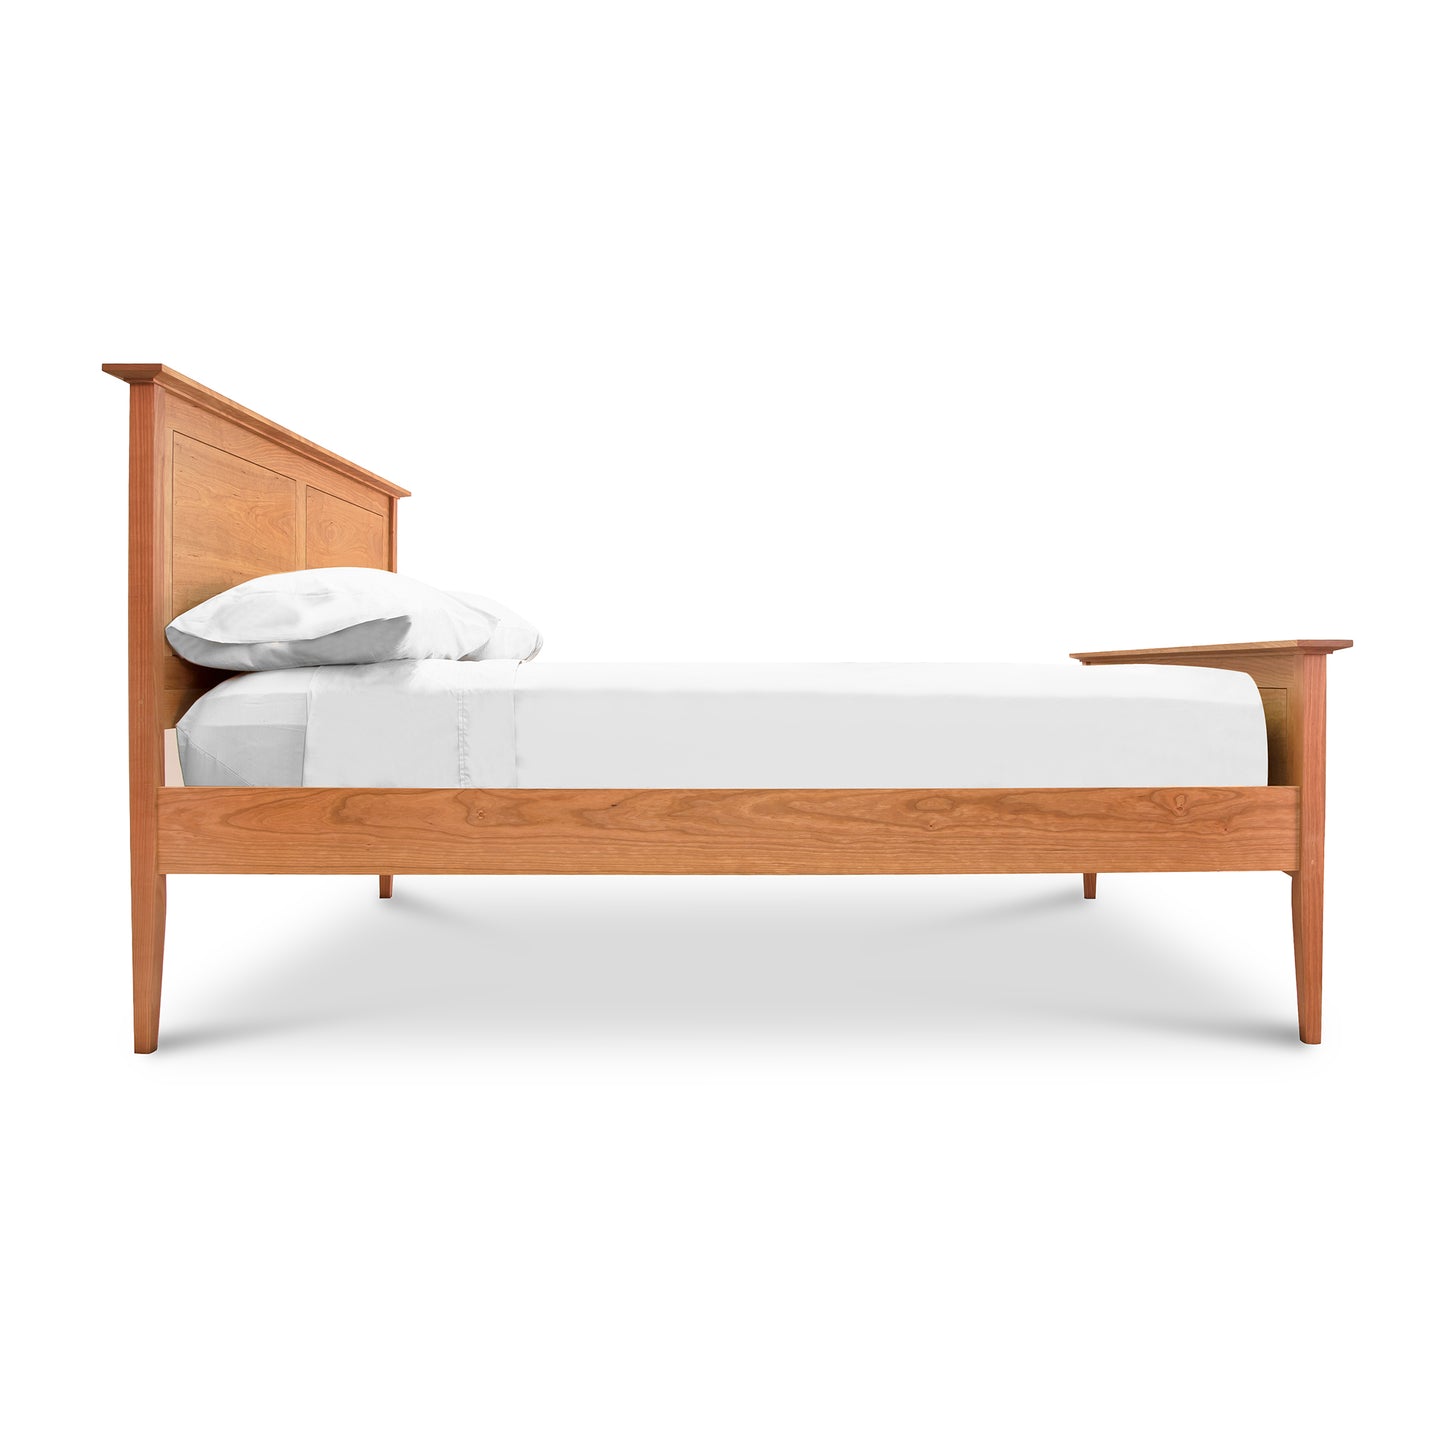 A Maple Corner Woodworks American Shaker Panel Bed frame with a classic design featuring a high headboard and a low footboard, equipped with a white mattress and two pillows. The bed is isolated on a white background.